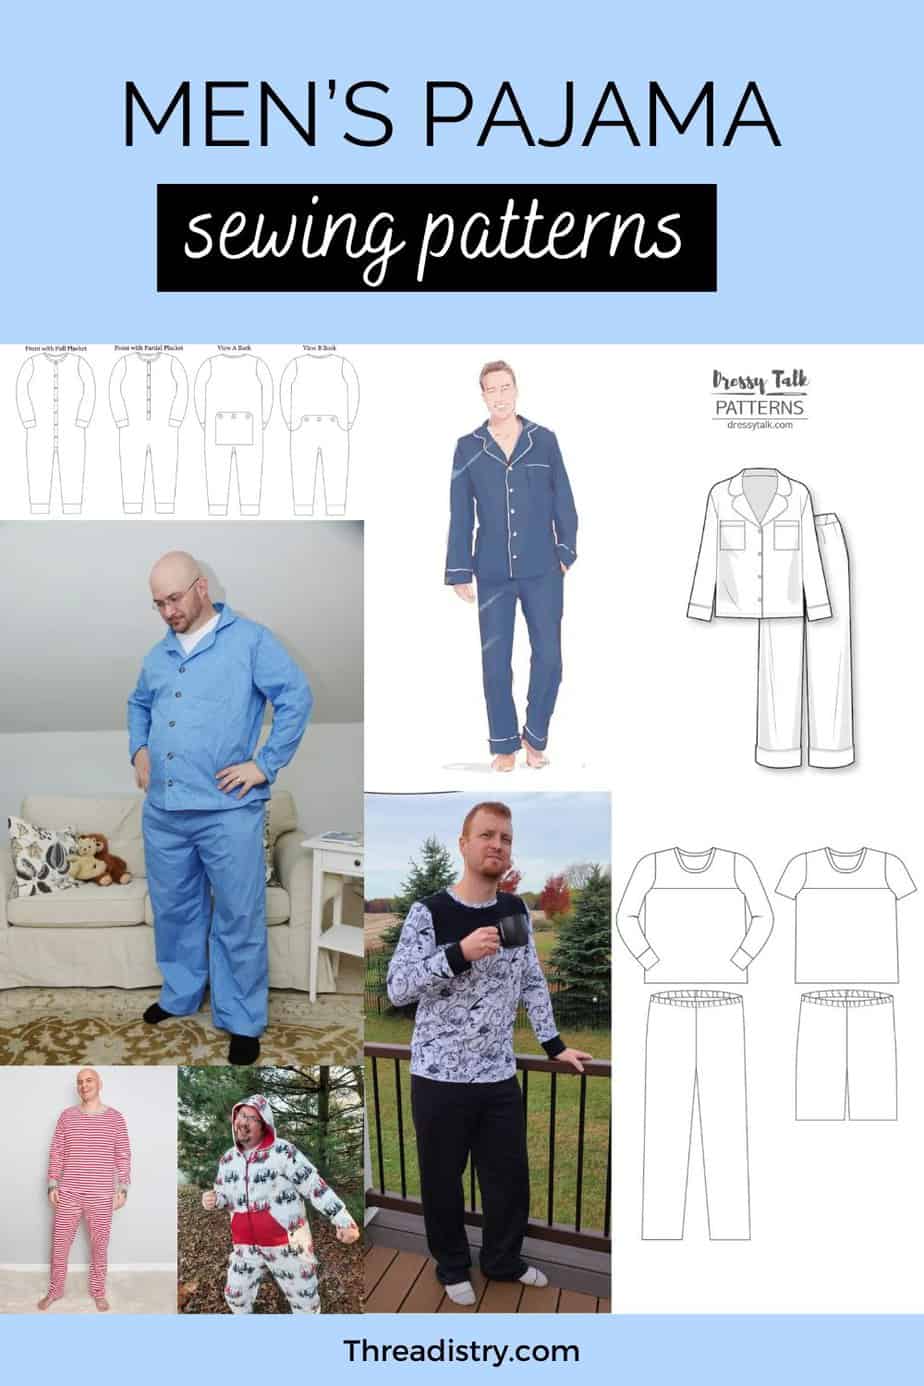 Collage of men wearing different styles of pajamas